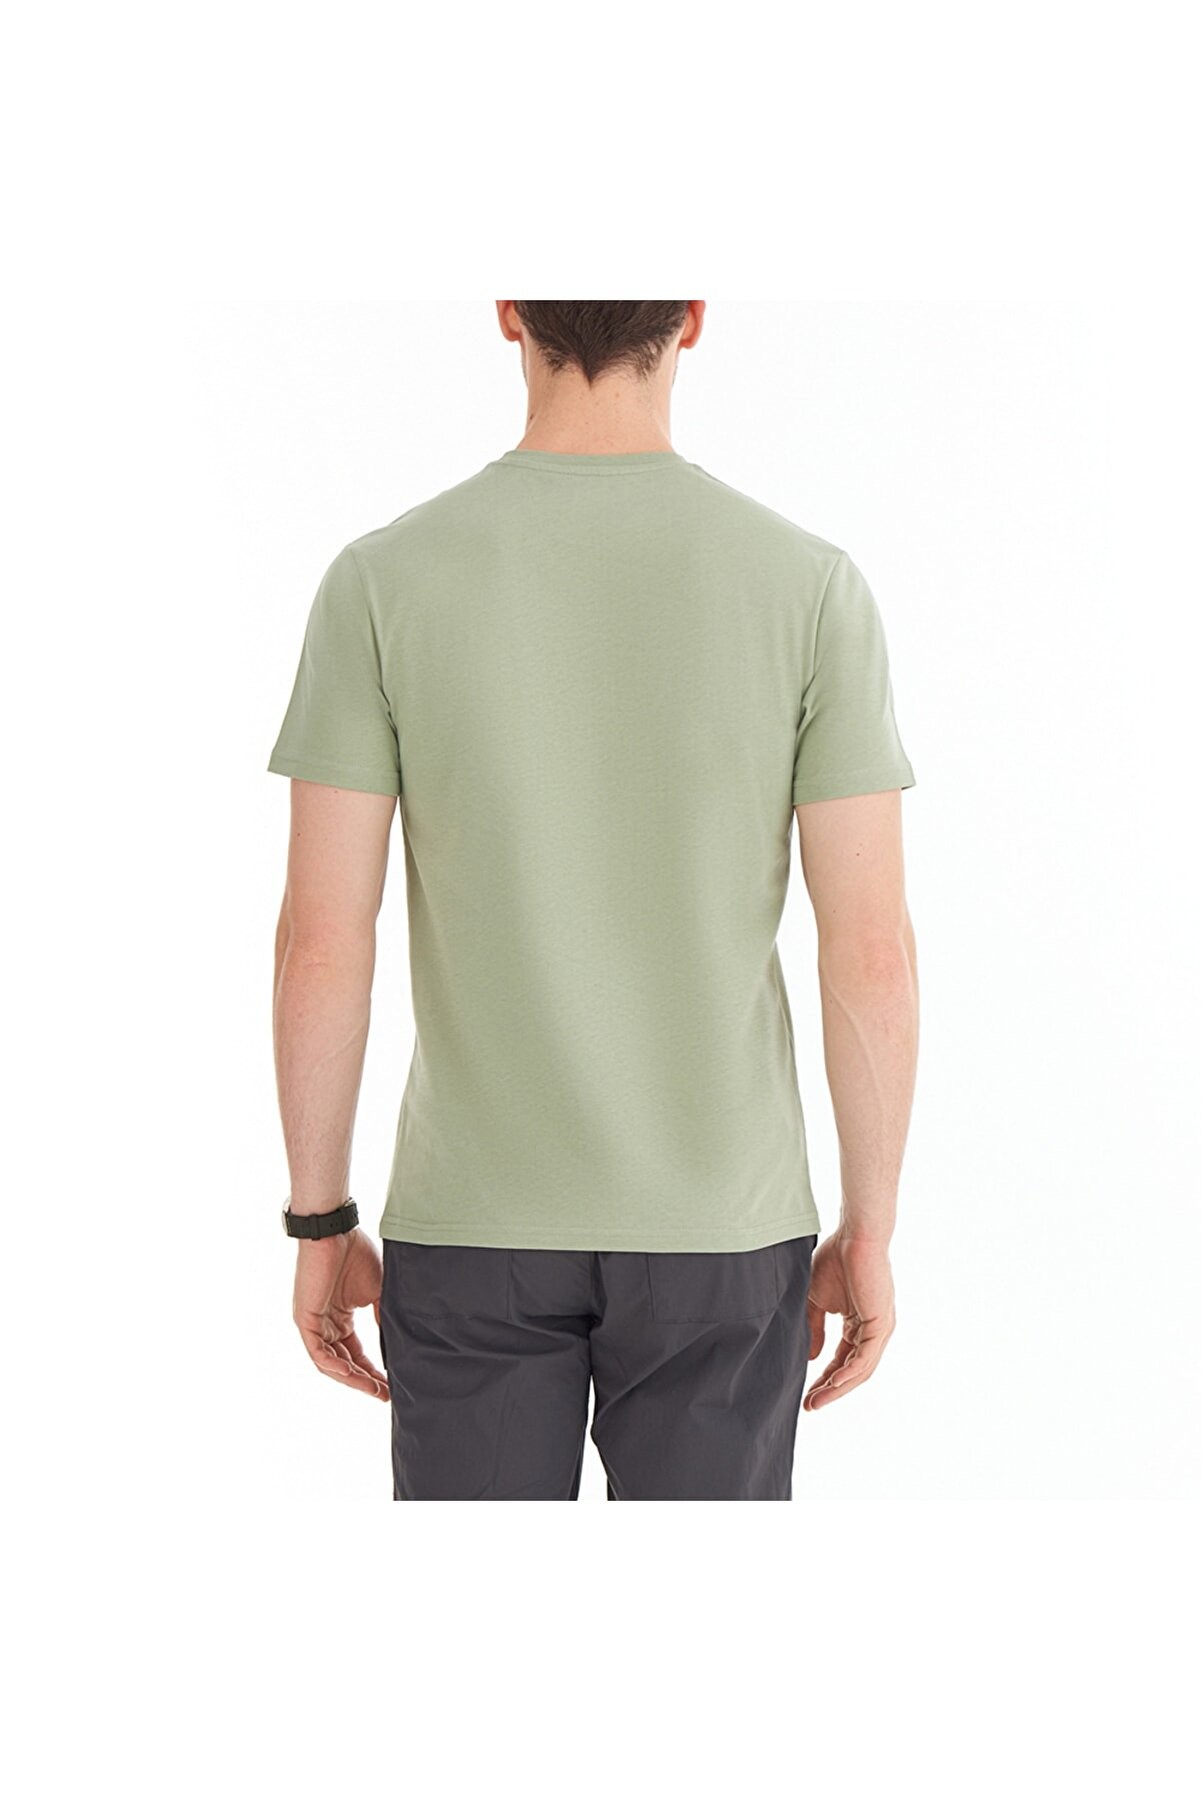 CS0237 CSC M HIKERS HAVEN SS TEE